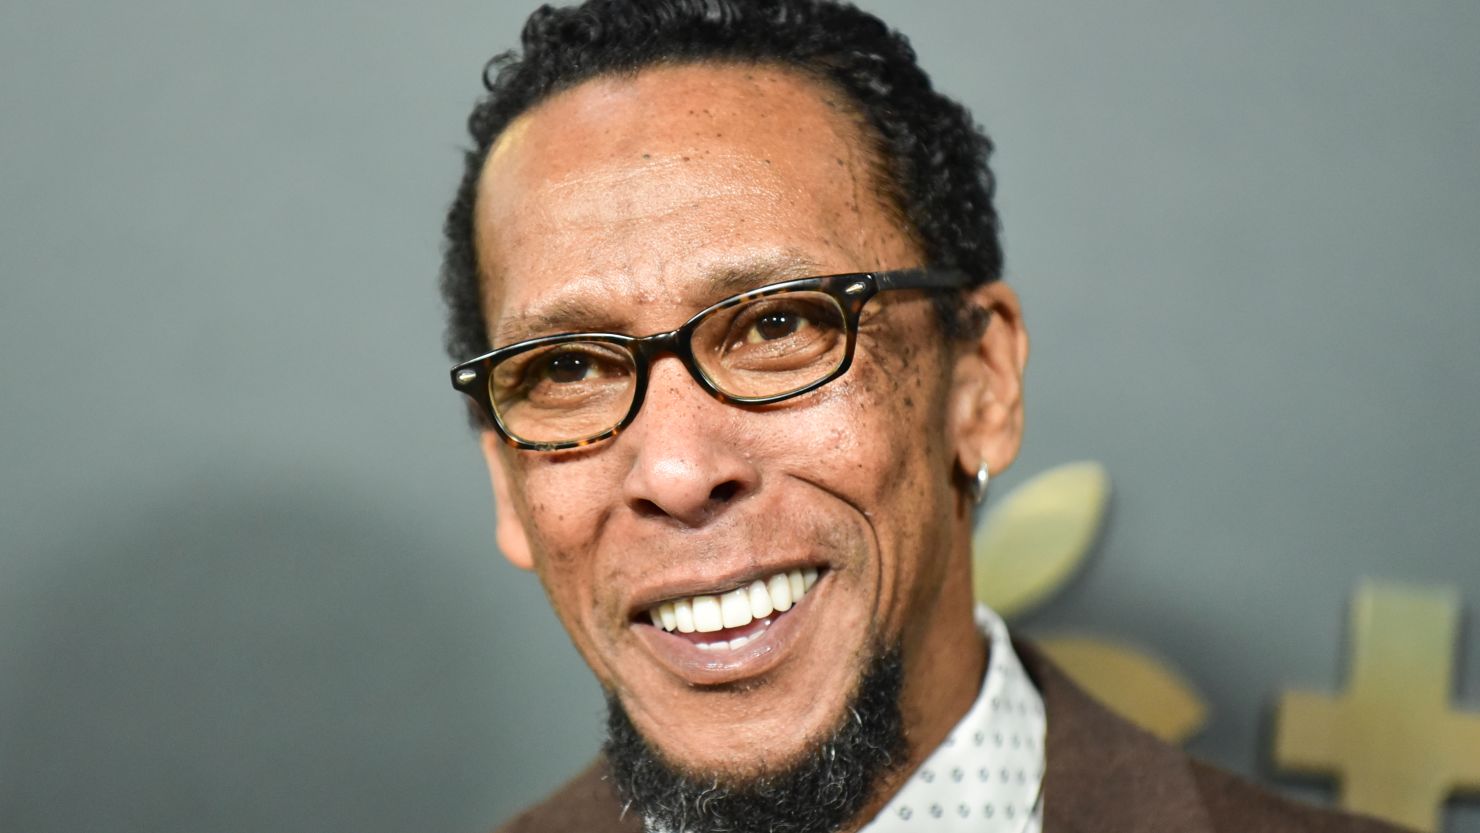 Ron Cephas Jones, who won two Emmy Awards for his role on NBC's "This is Us," has died.